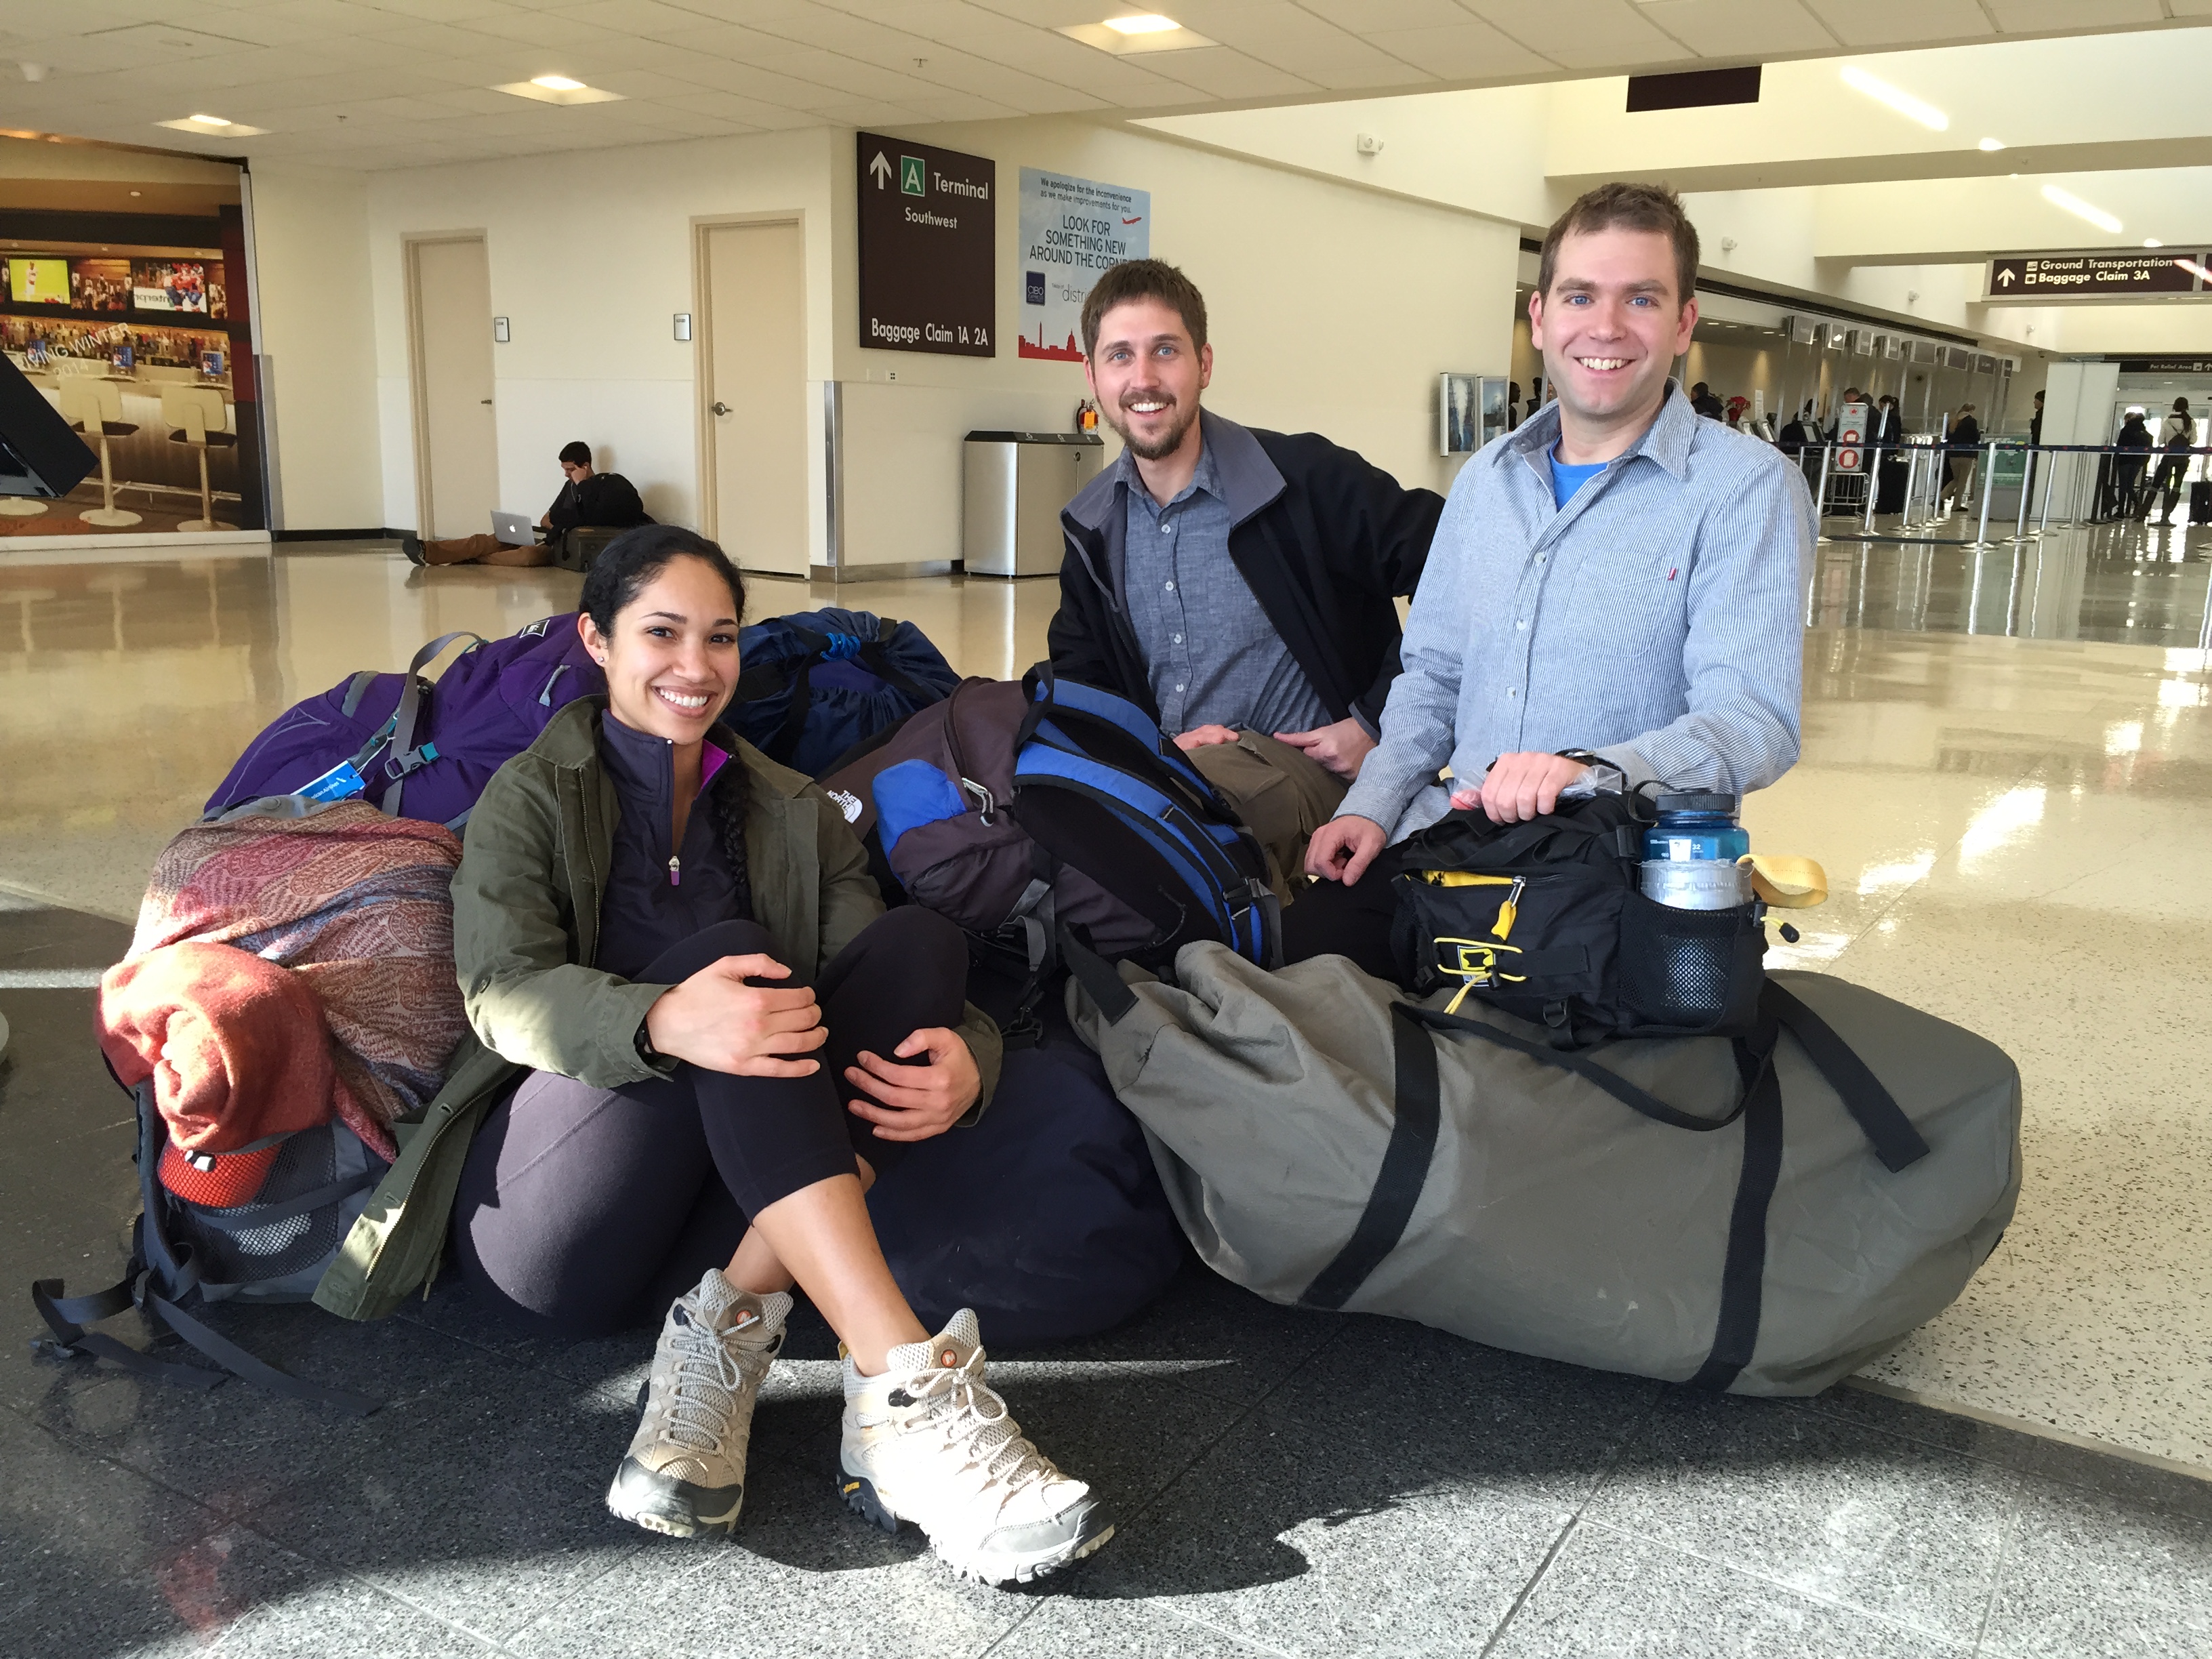 (left to right) Ashley, Gerritt, and Rob are have taken off from Washington, DC for Mbokop